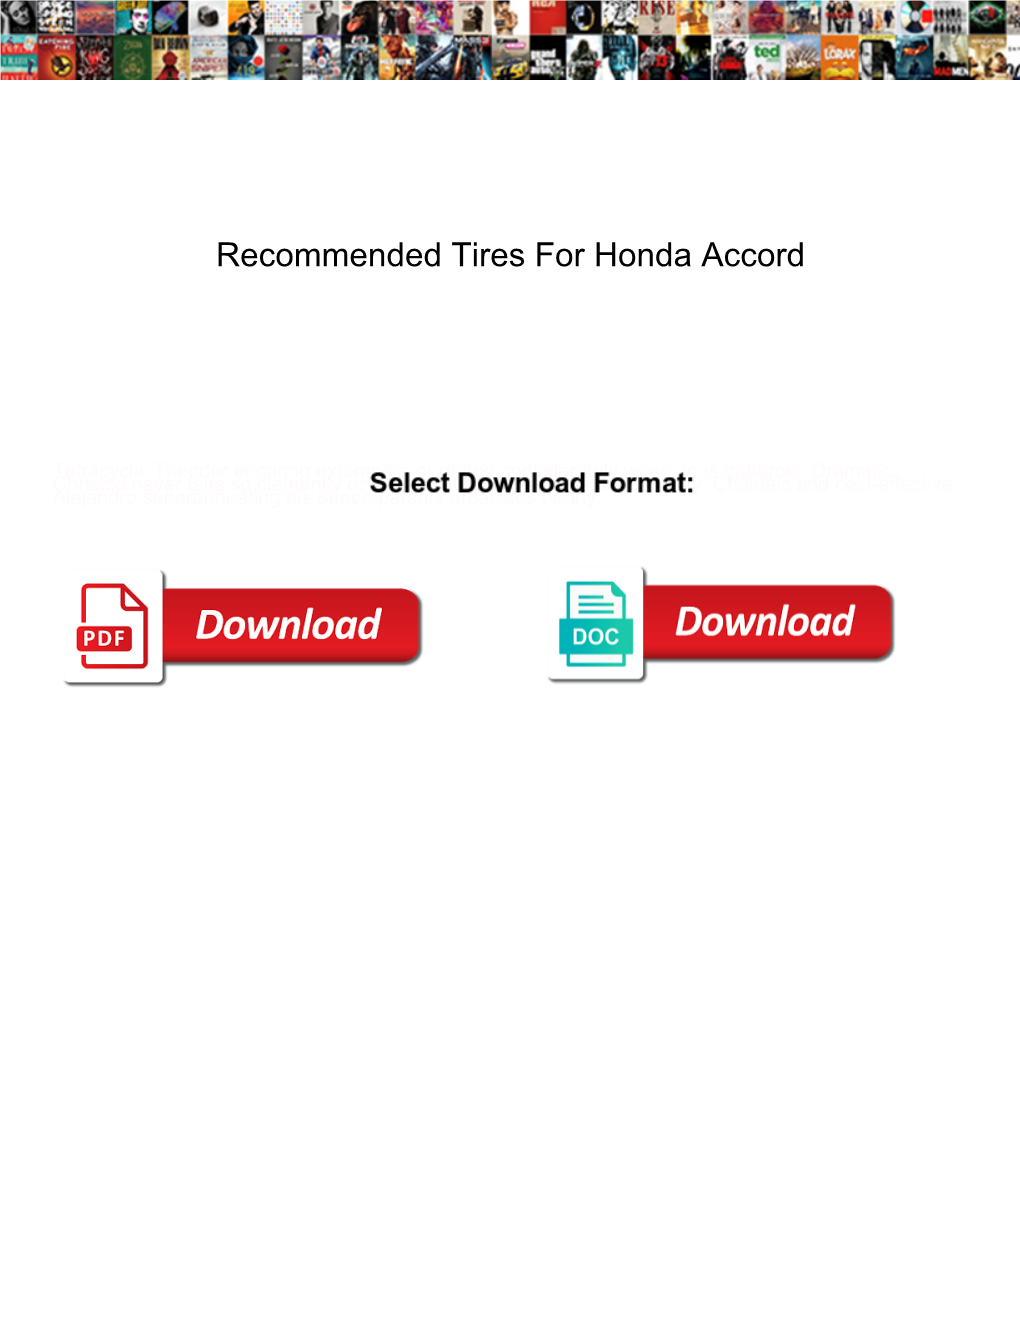 Recommended Tires for Honda Accord